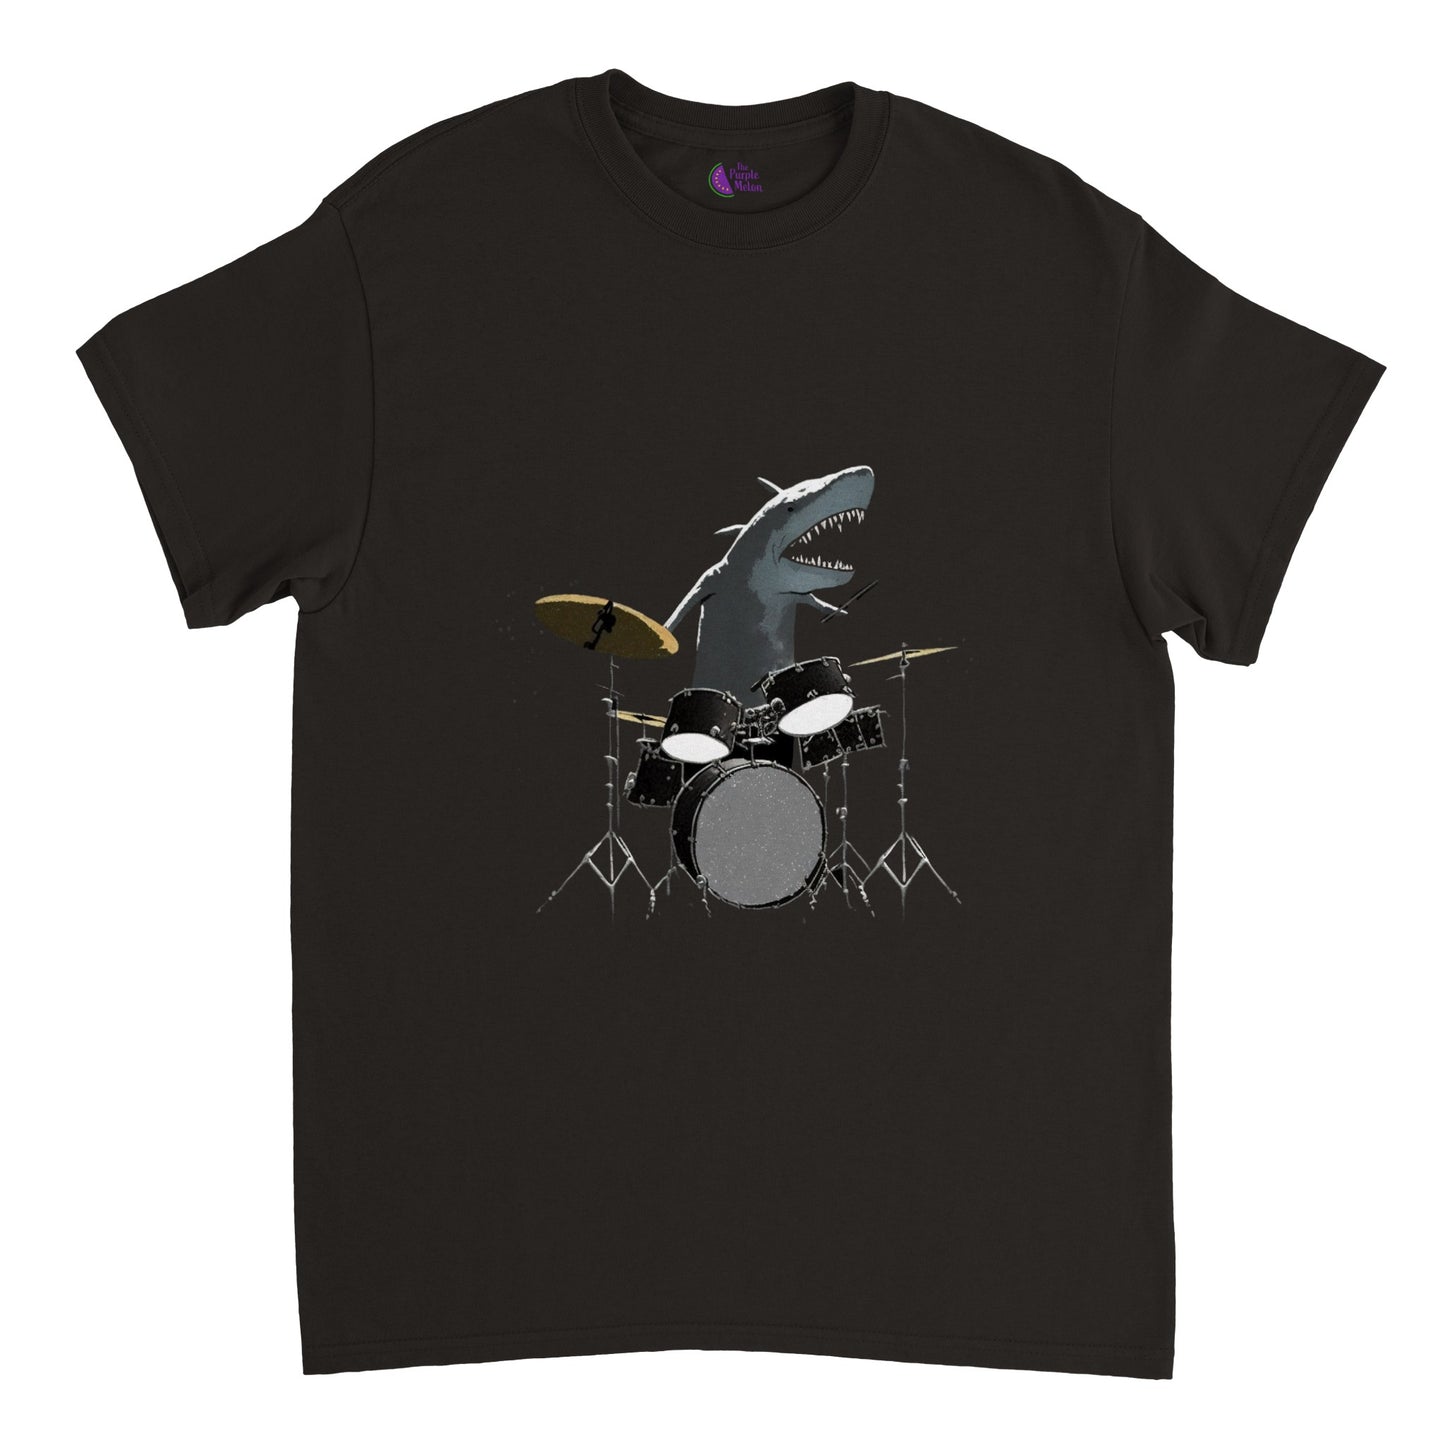 A black t-shirt with a shark playing drums illustration